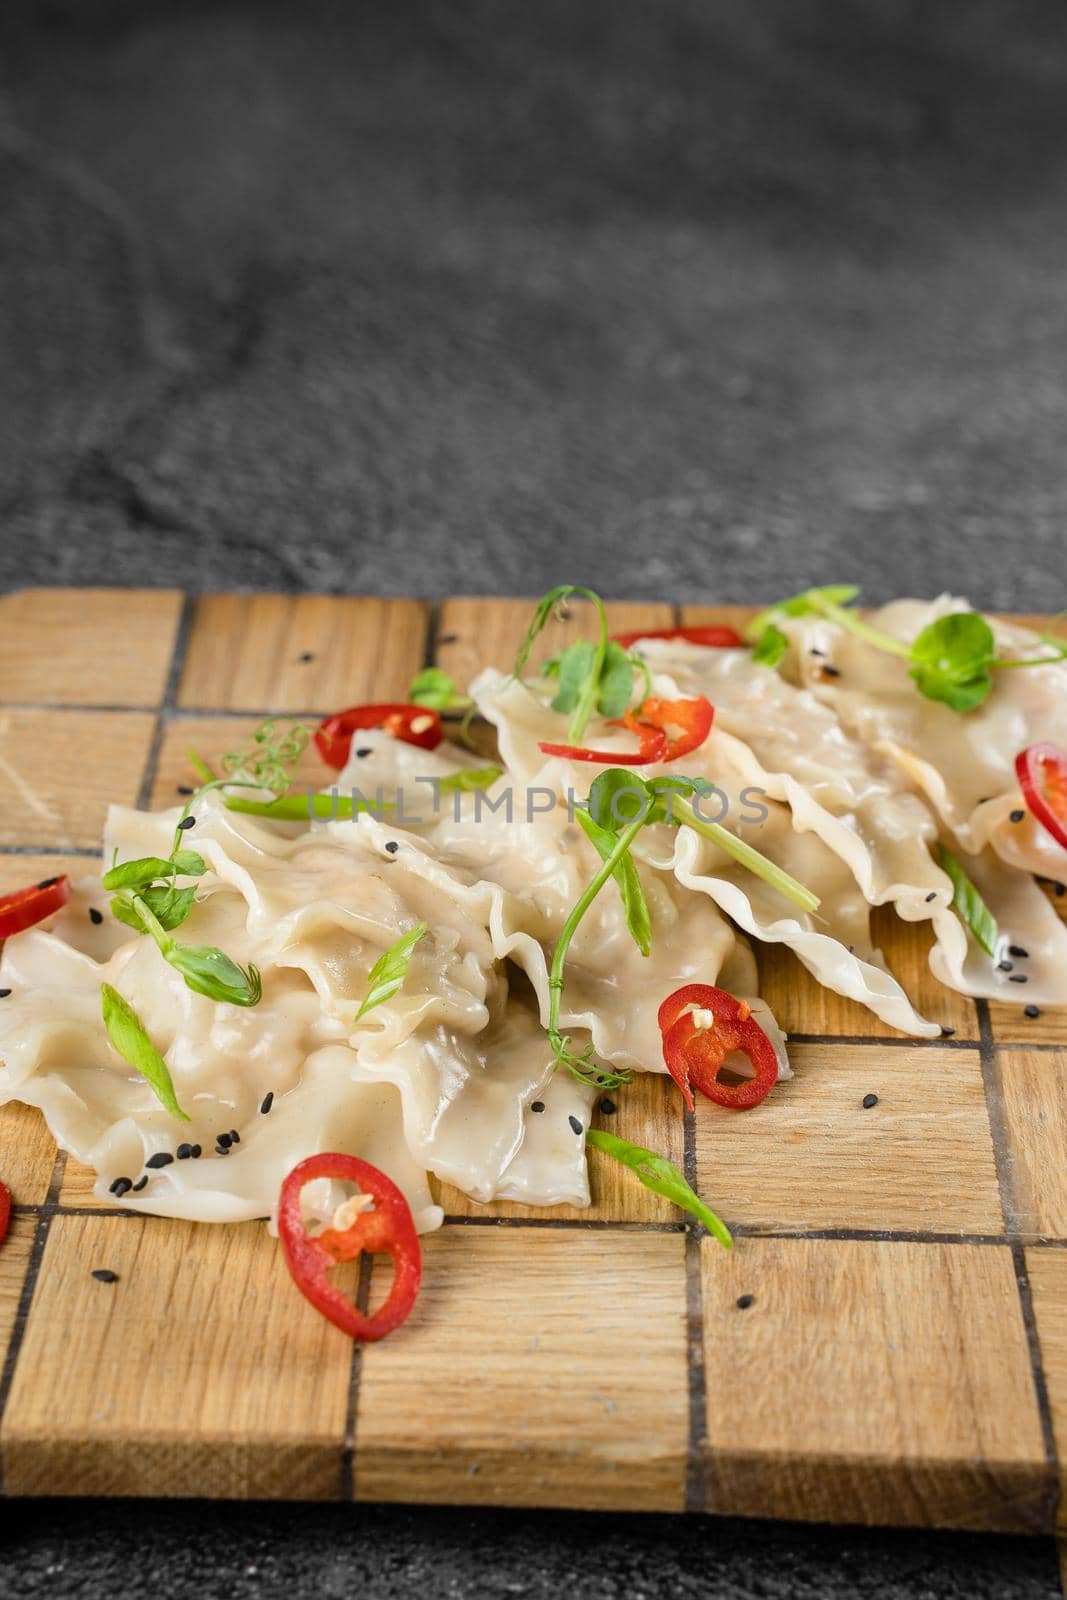 Jiaozi chinese dumplings named gyoza on wooden plate. Asian traditional fast food. Dough dish stuffed with meat and vegetables, less often only meat. by Rabizo